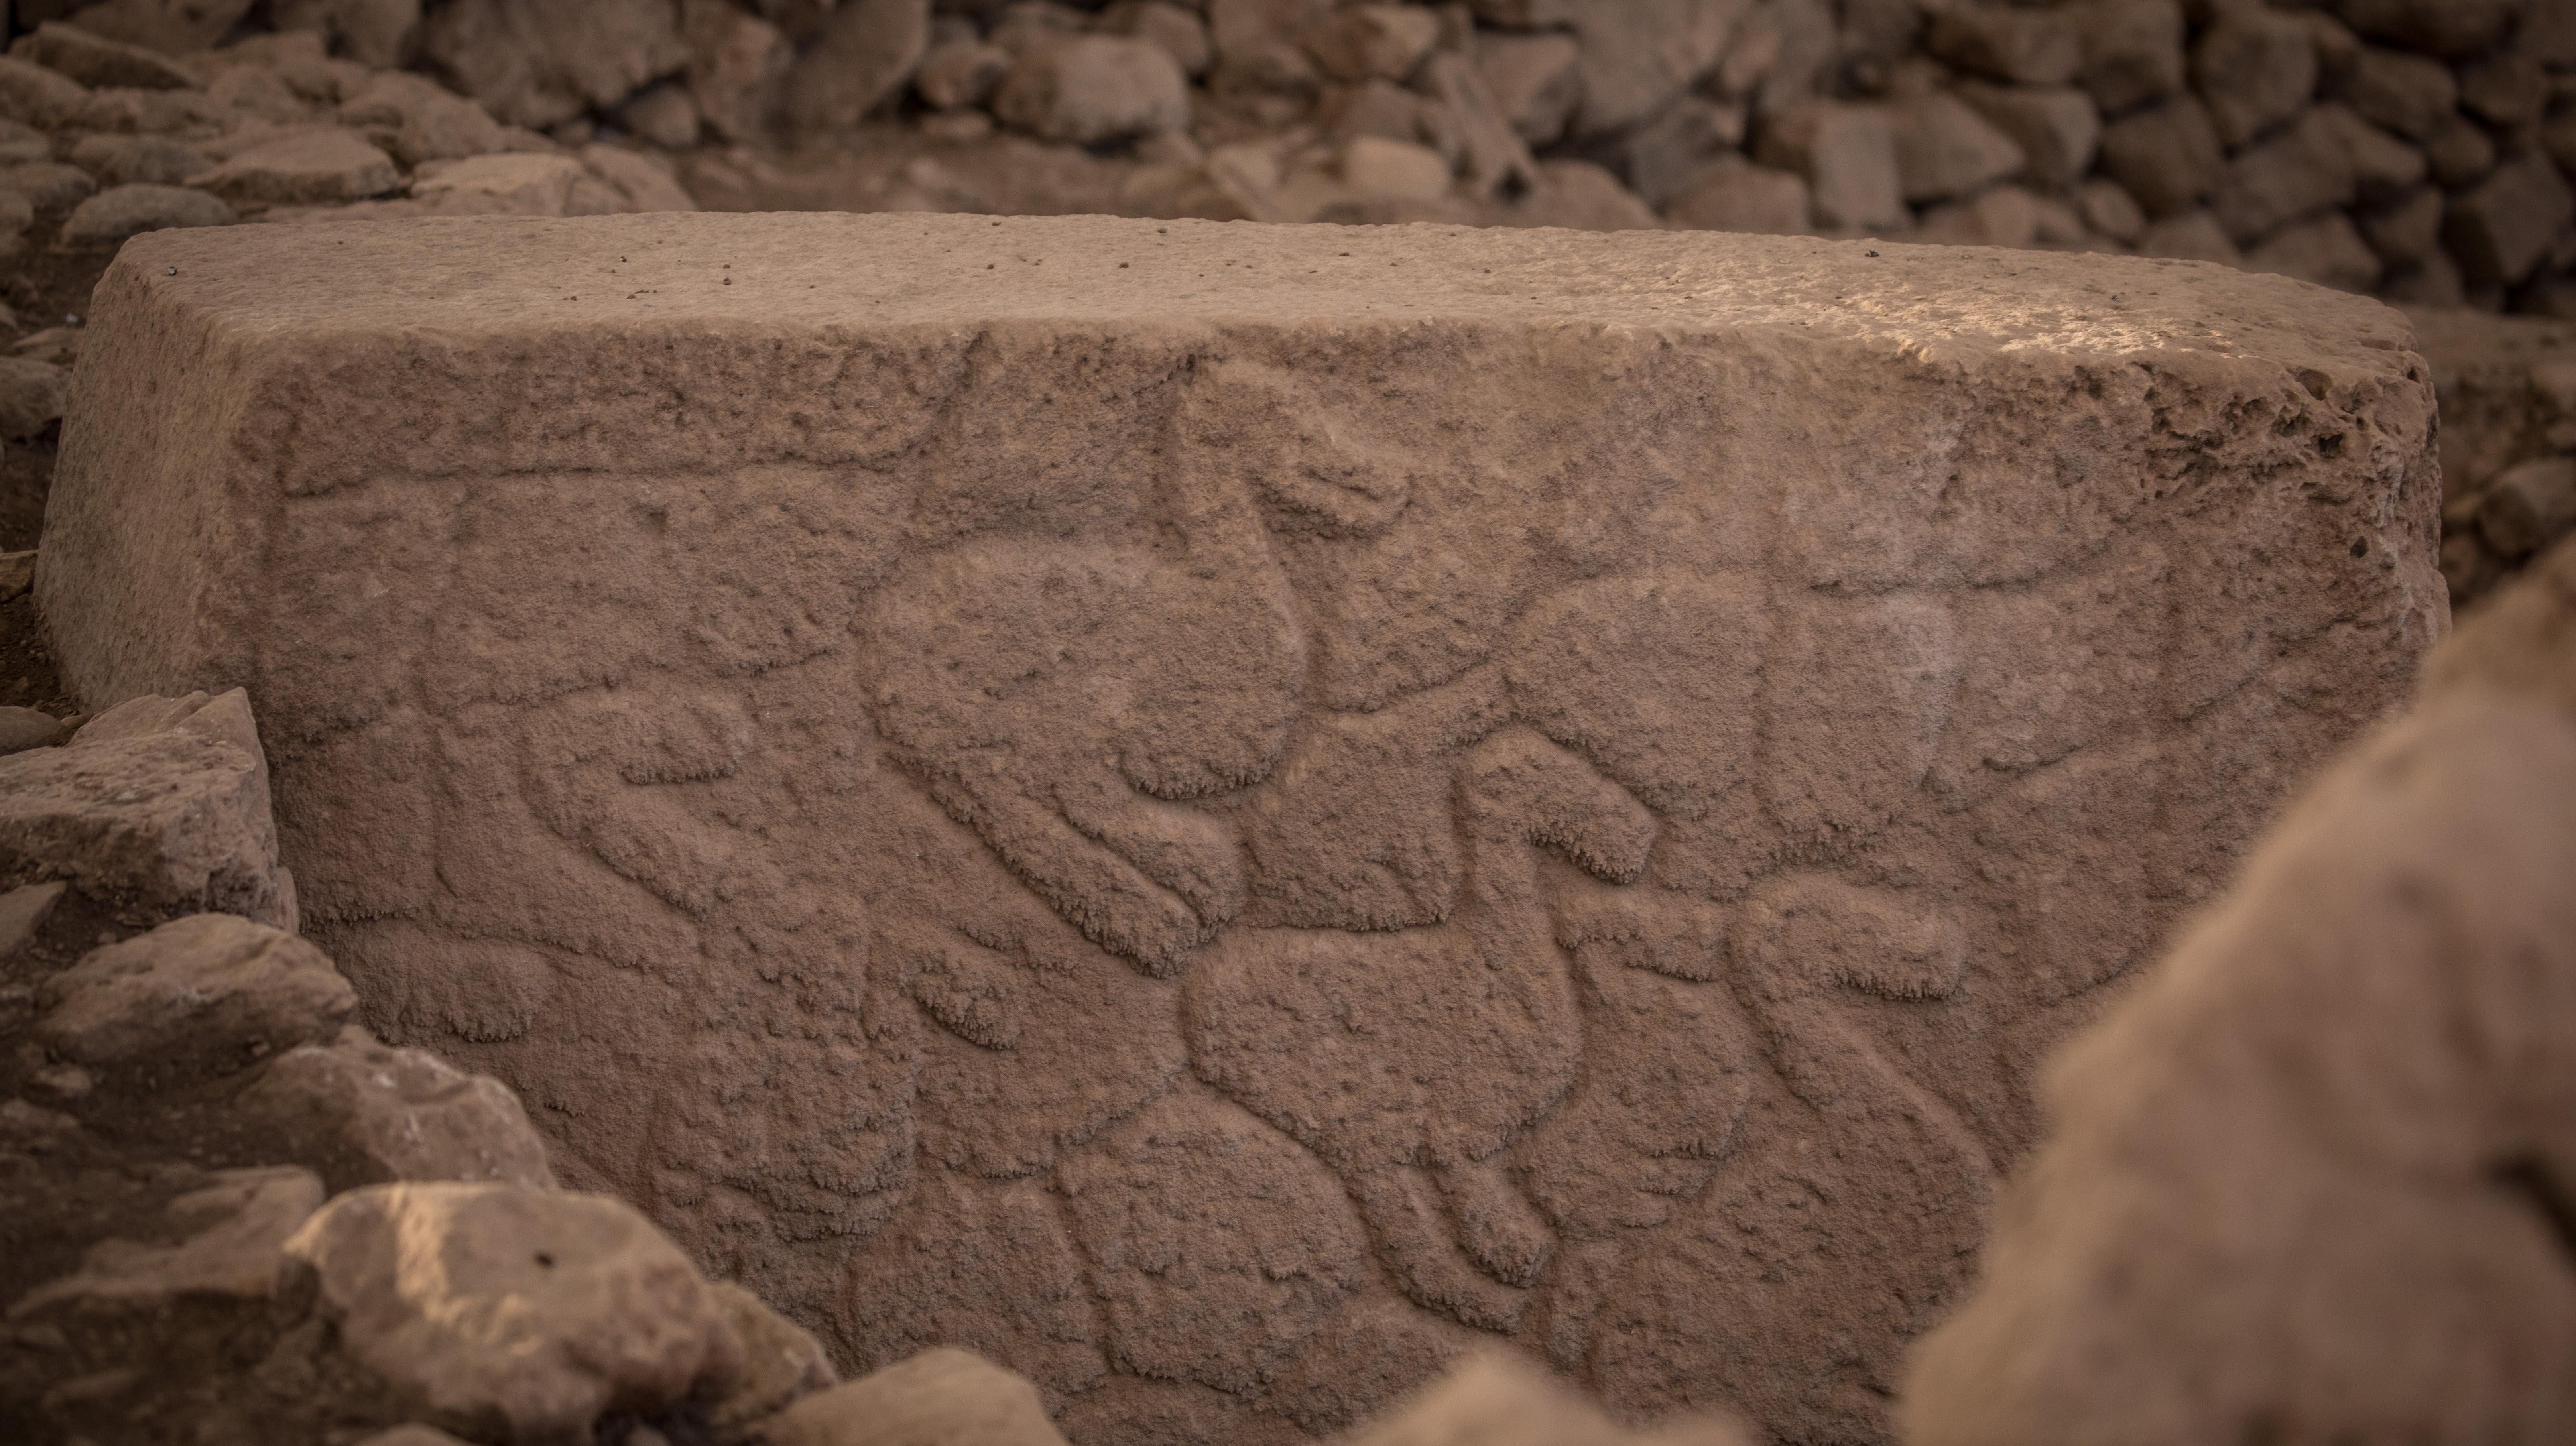 Apparent bird figures carved into a stone at Göbekli Tepe. (Photo: Chris McGrath, Getty Images)